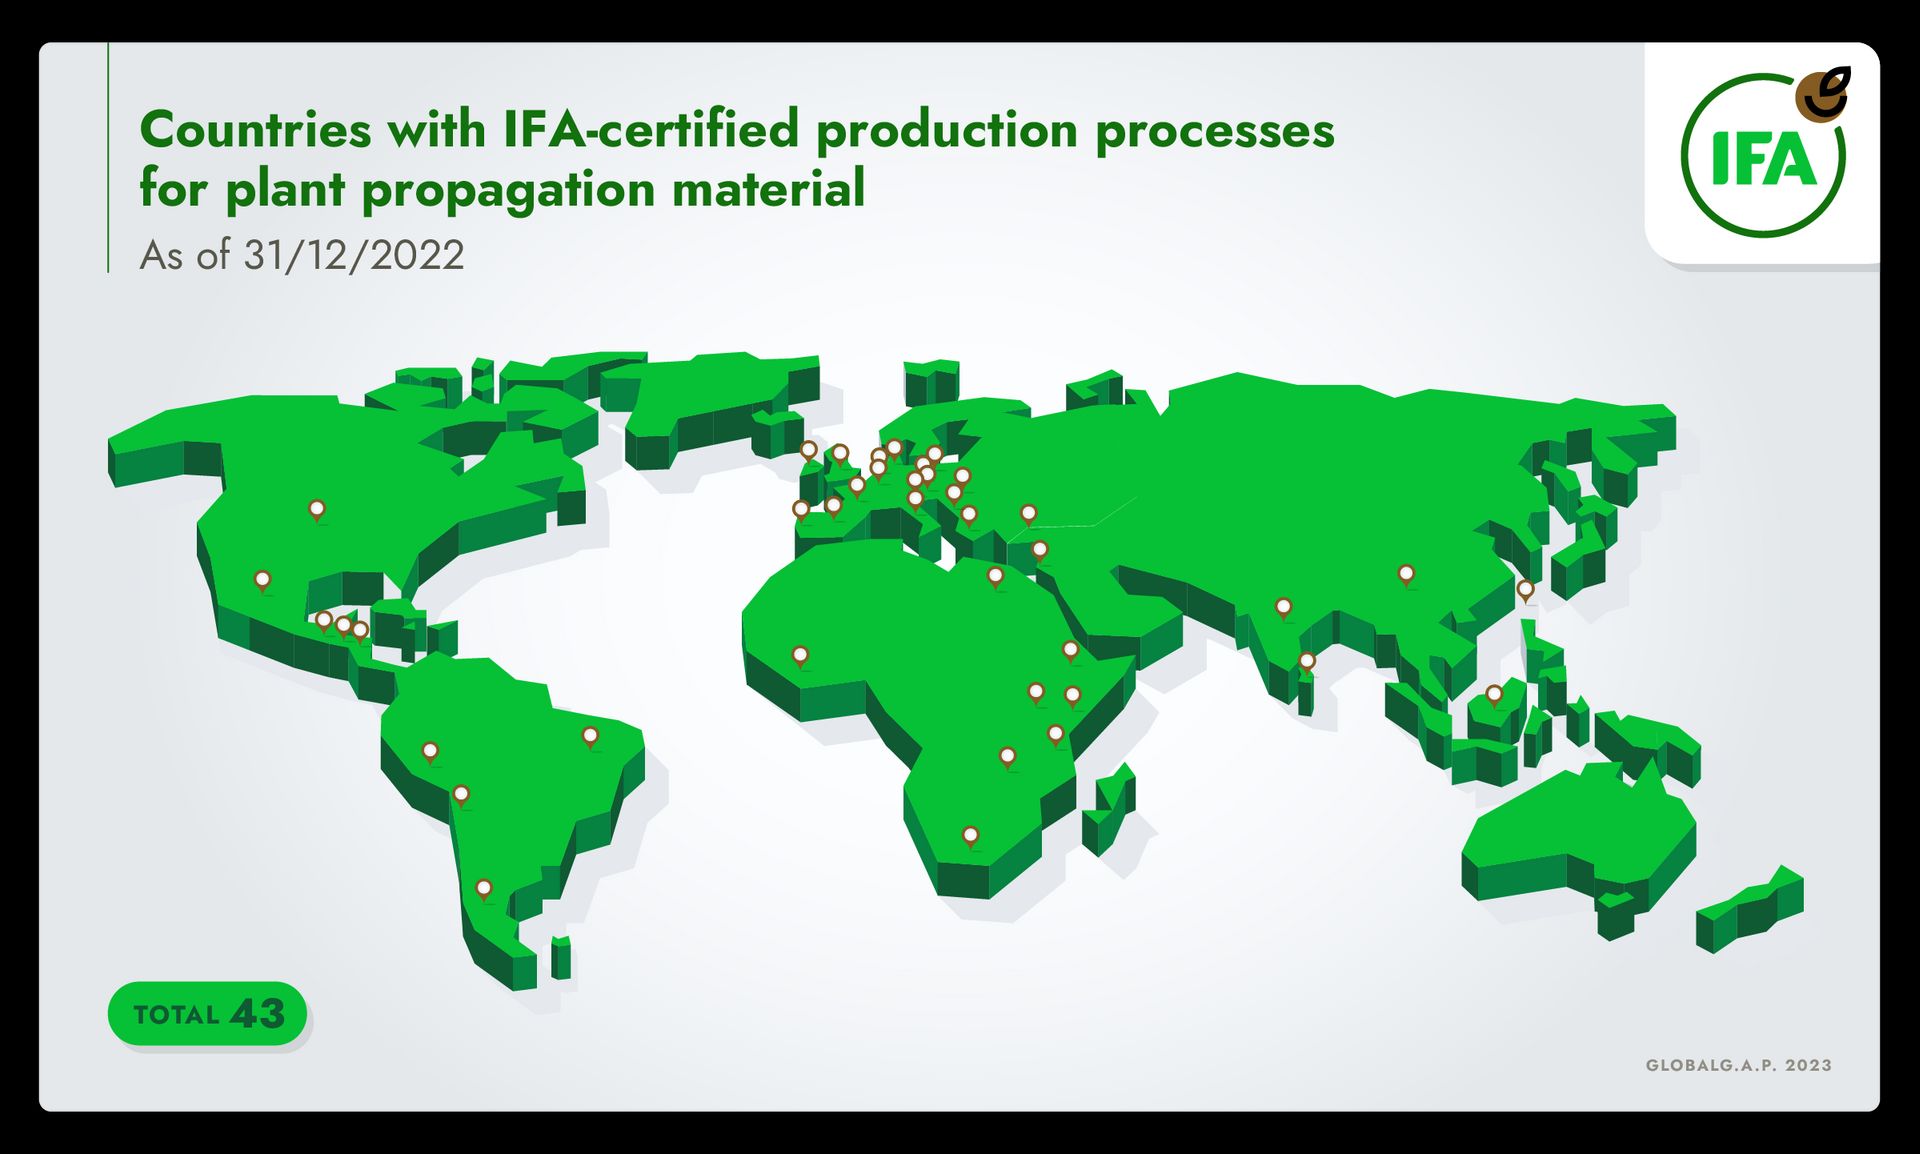 World map identifying countries with Integrated Farm Assurance certified production processes for plant propagation material